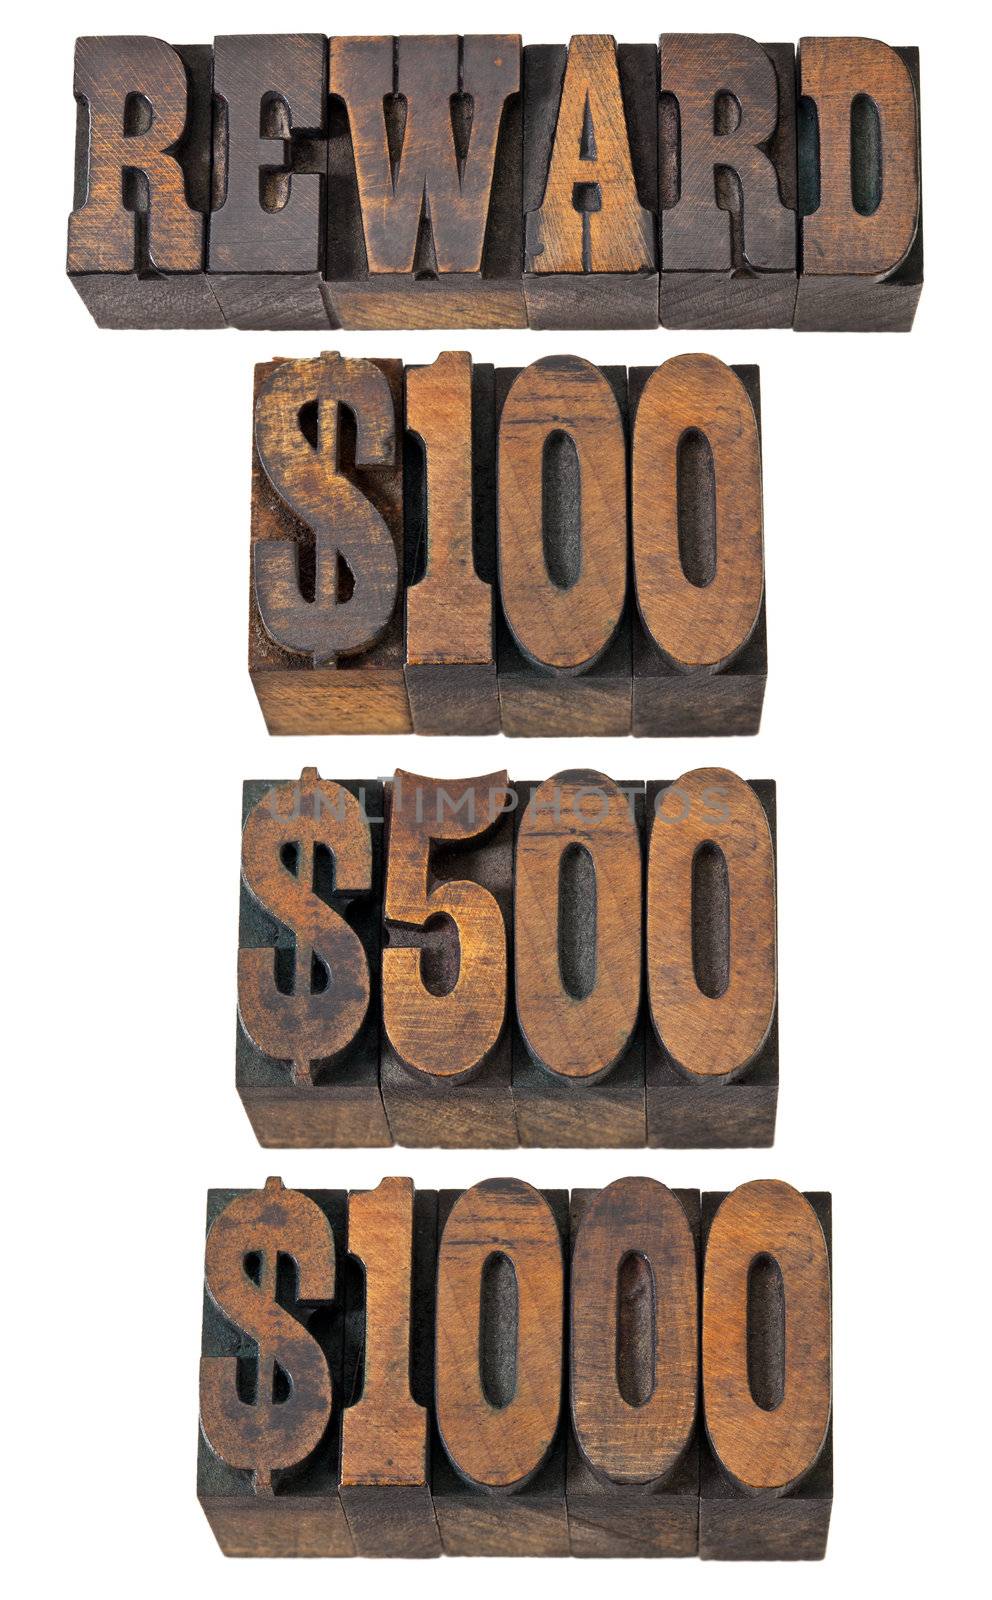 reward word and 100, 500, 1000 dollar amounts - isolated text in vintage letterpress wood type - French Clarendon font popular in western movies and memorabilia